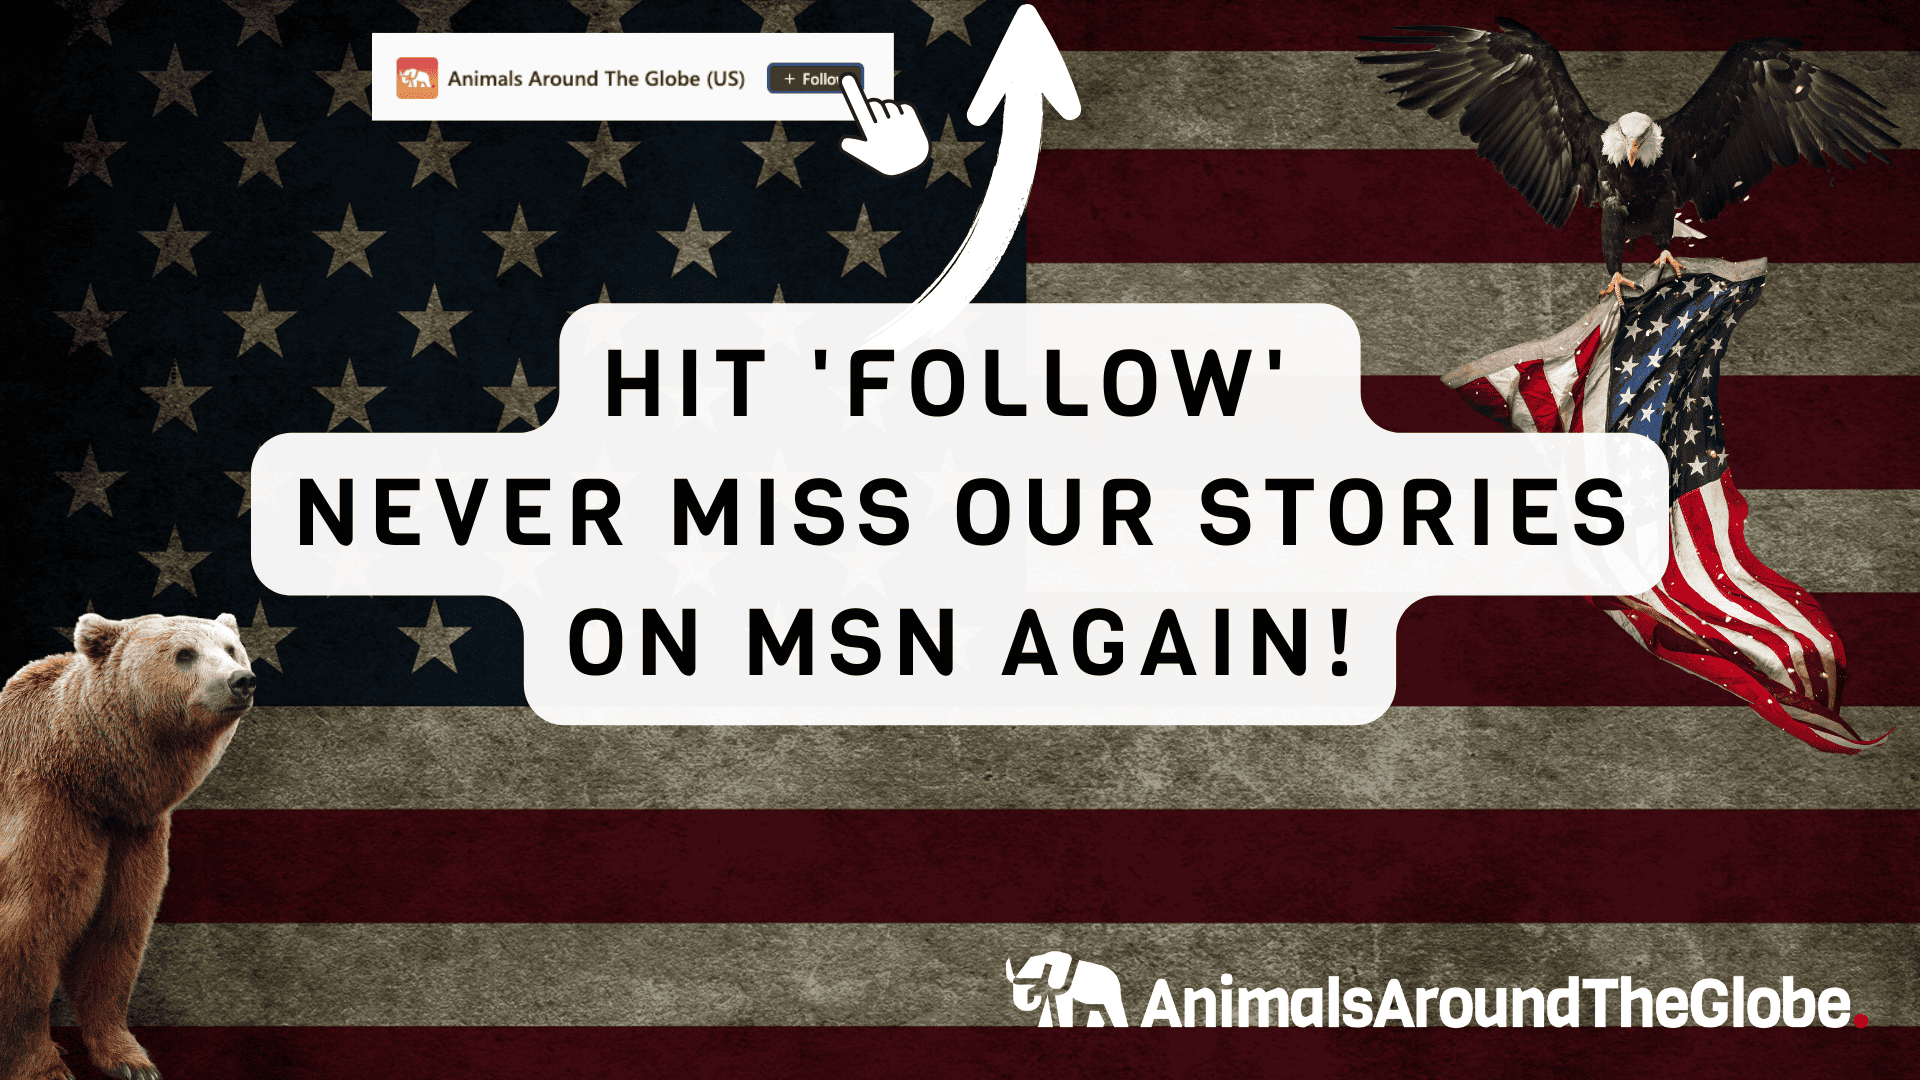 <p>To keep up with the latest from Animals Around the Globe in your Microsoft Start feed or MSN homepage, scroll up and click the ‘Follow’ button!</p>     <p> Subscribe to our <a href="https://www.animalsaroundtheglobe.com/animal-news/">newsletter</a> for daily animal news, or follow us from our profile <a href="https://www.msn.com/en-us/channel/source/Animals%20Around%20The%20Globe%20US/sr-vid-ryujycftmyx7d7tmb5trkya28raxe6r56iuty5739ky2rf5d5wws">on Microsoft Start</a>.</p>